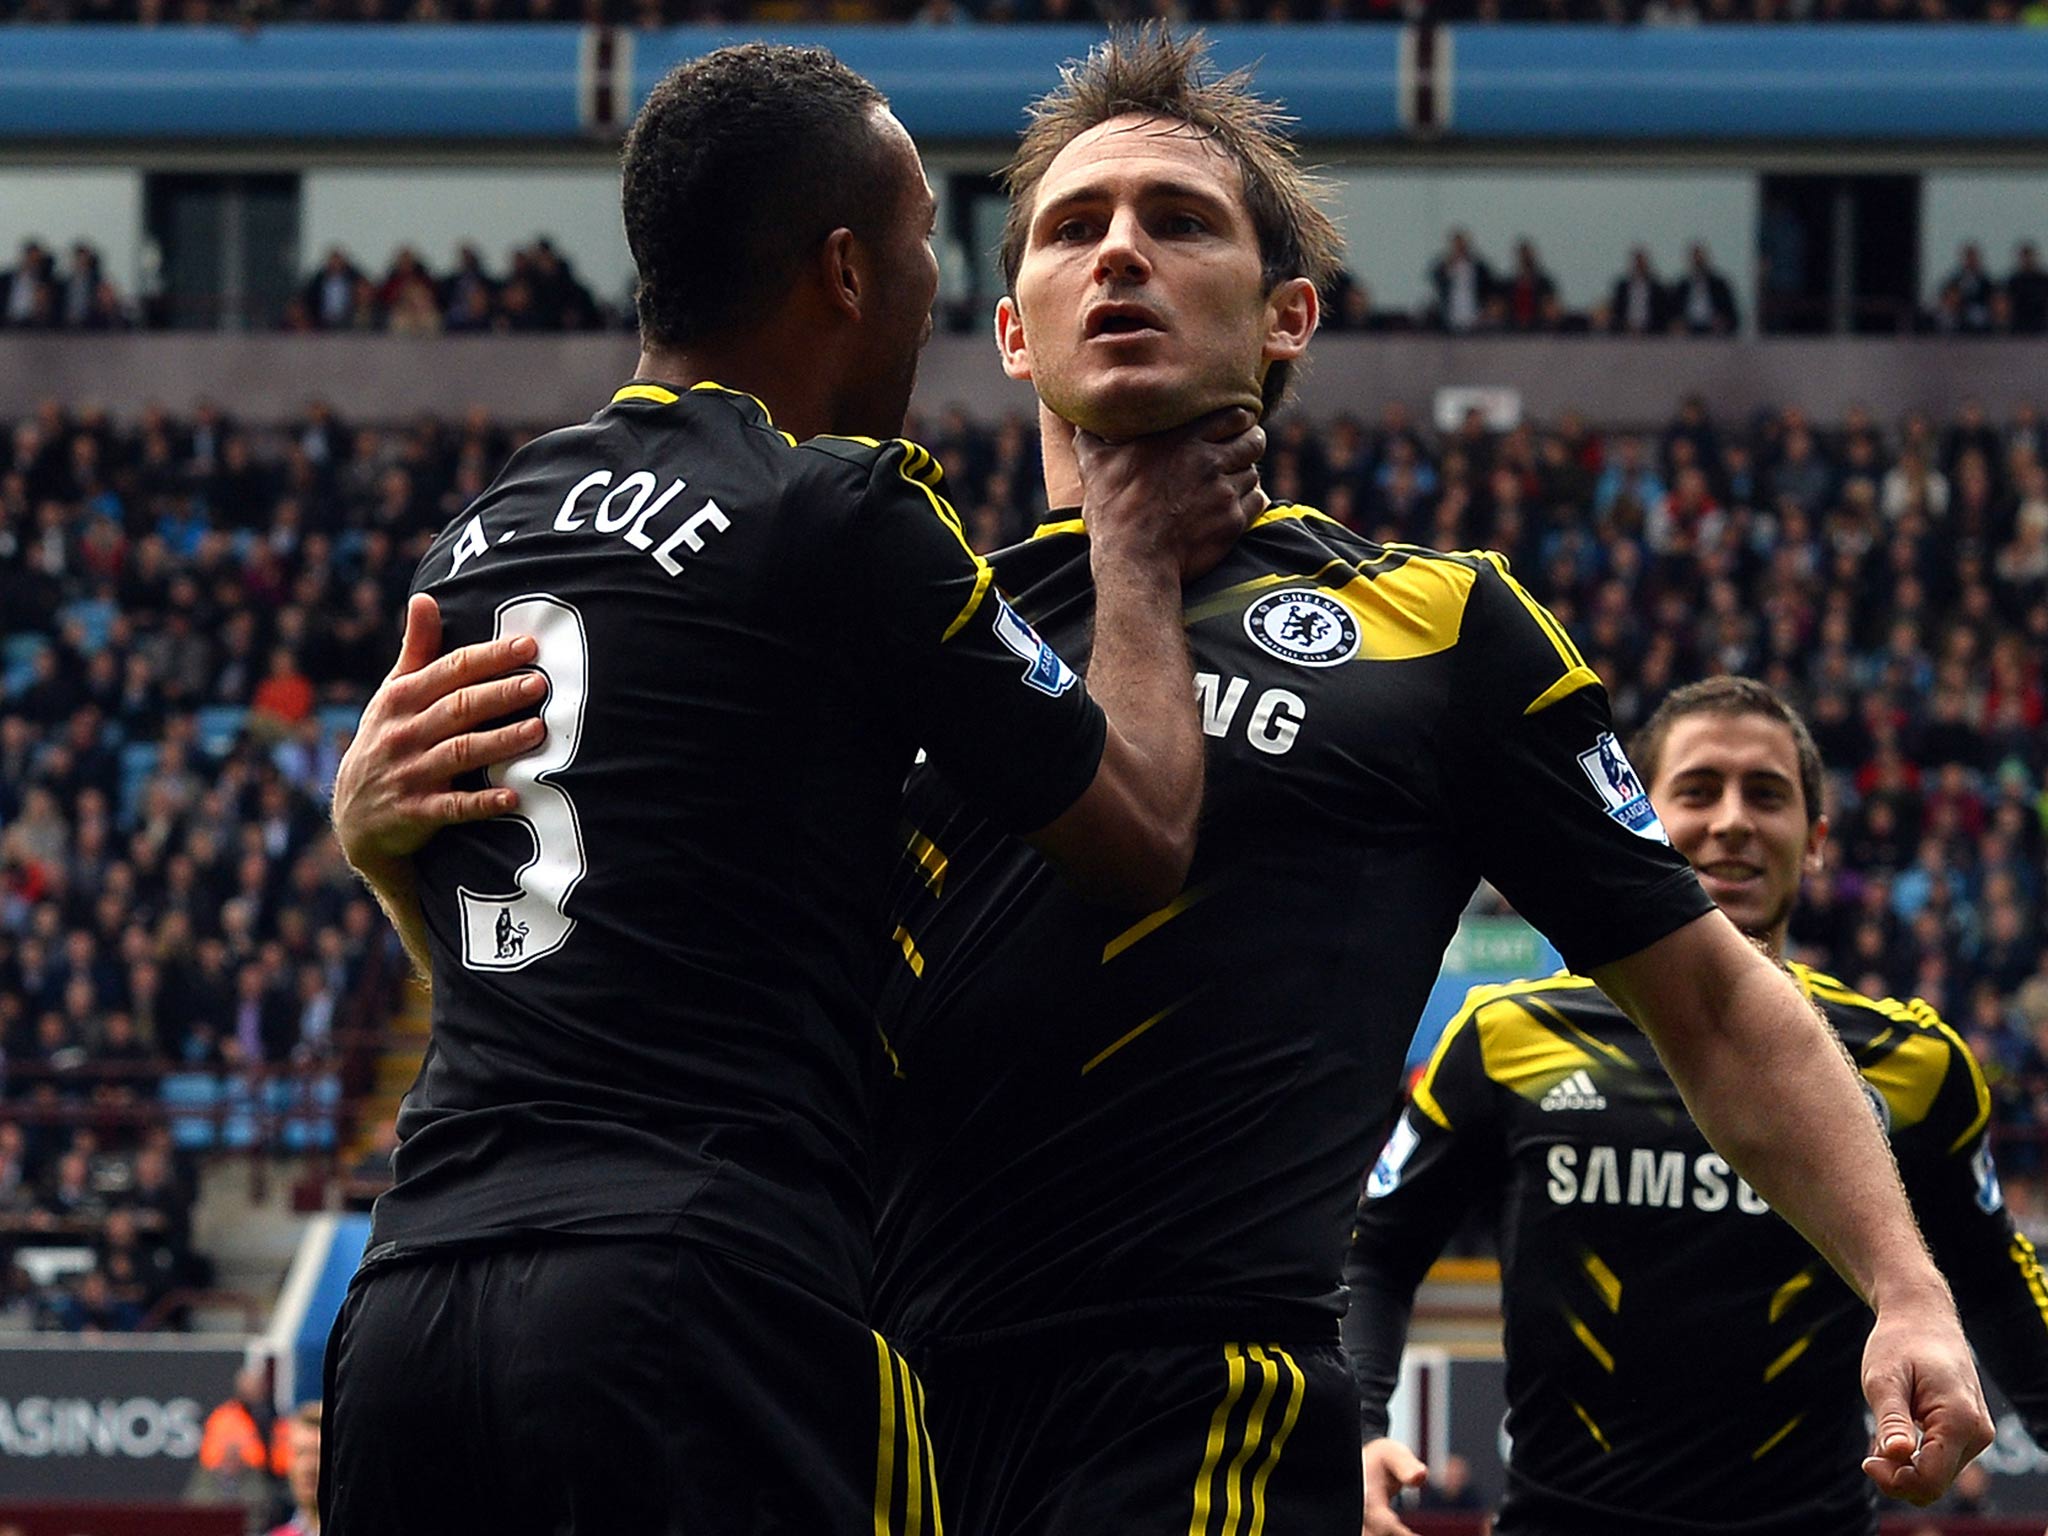 Frank Lampard celebrates his 202nd goal as he claims the all-time Chelsea goal-scoring record